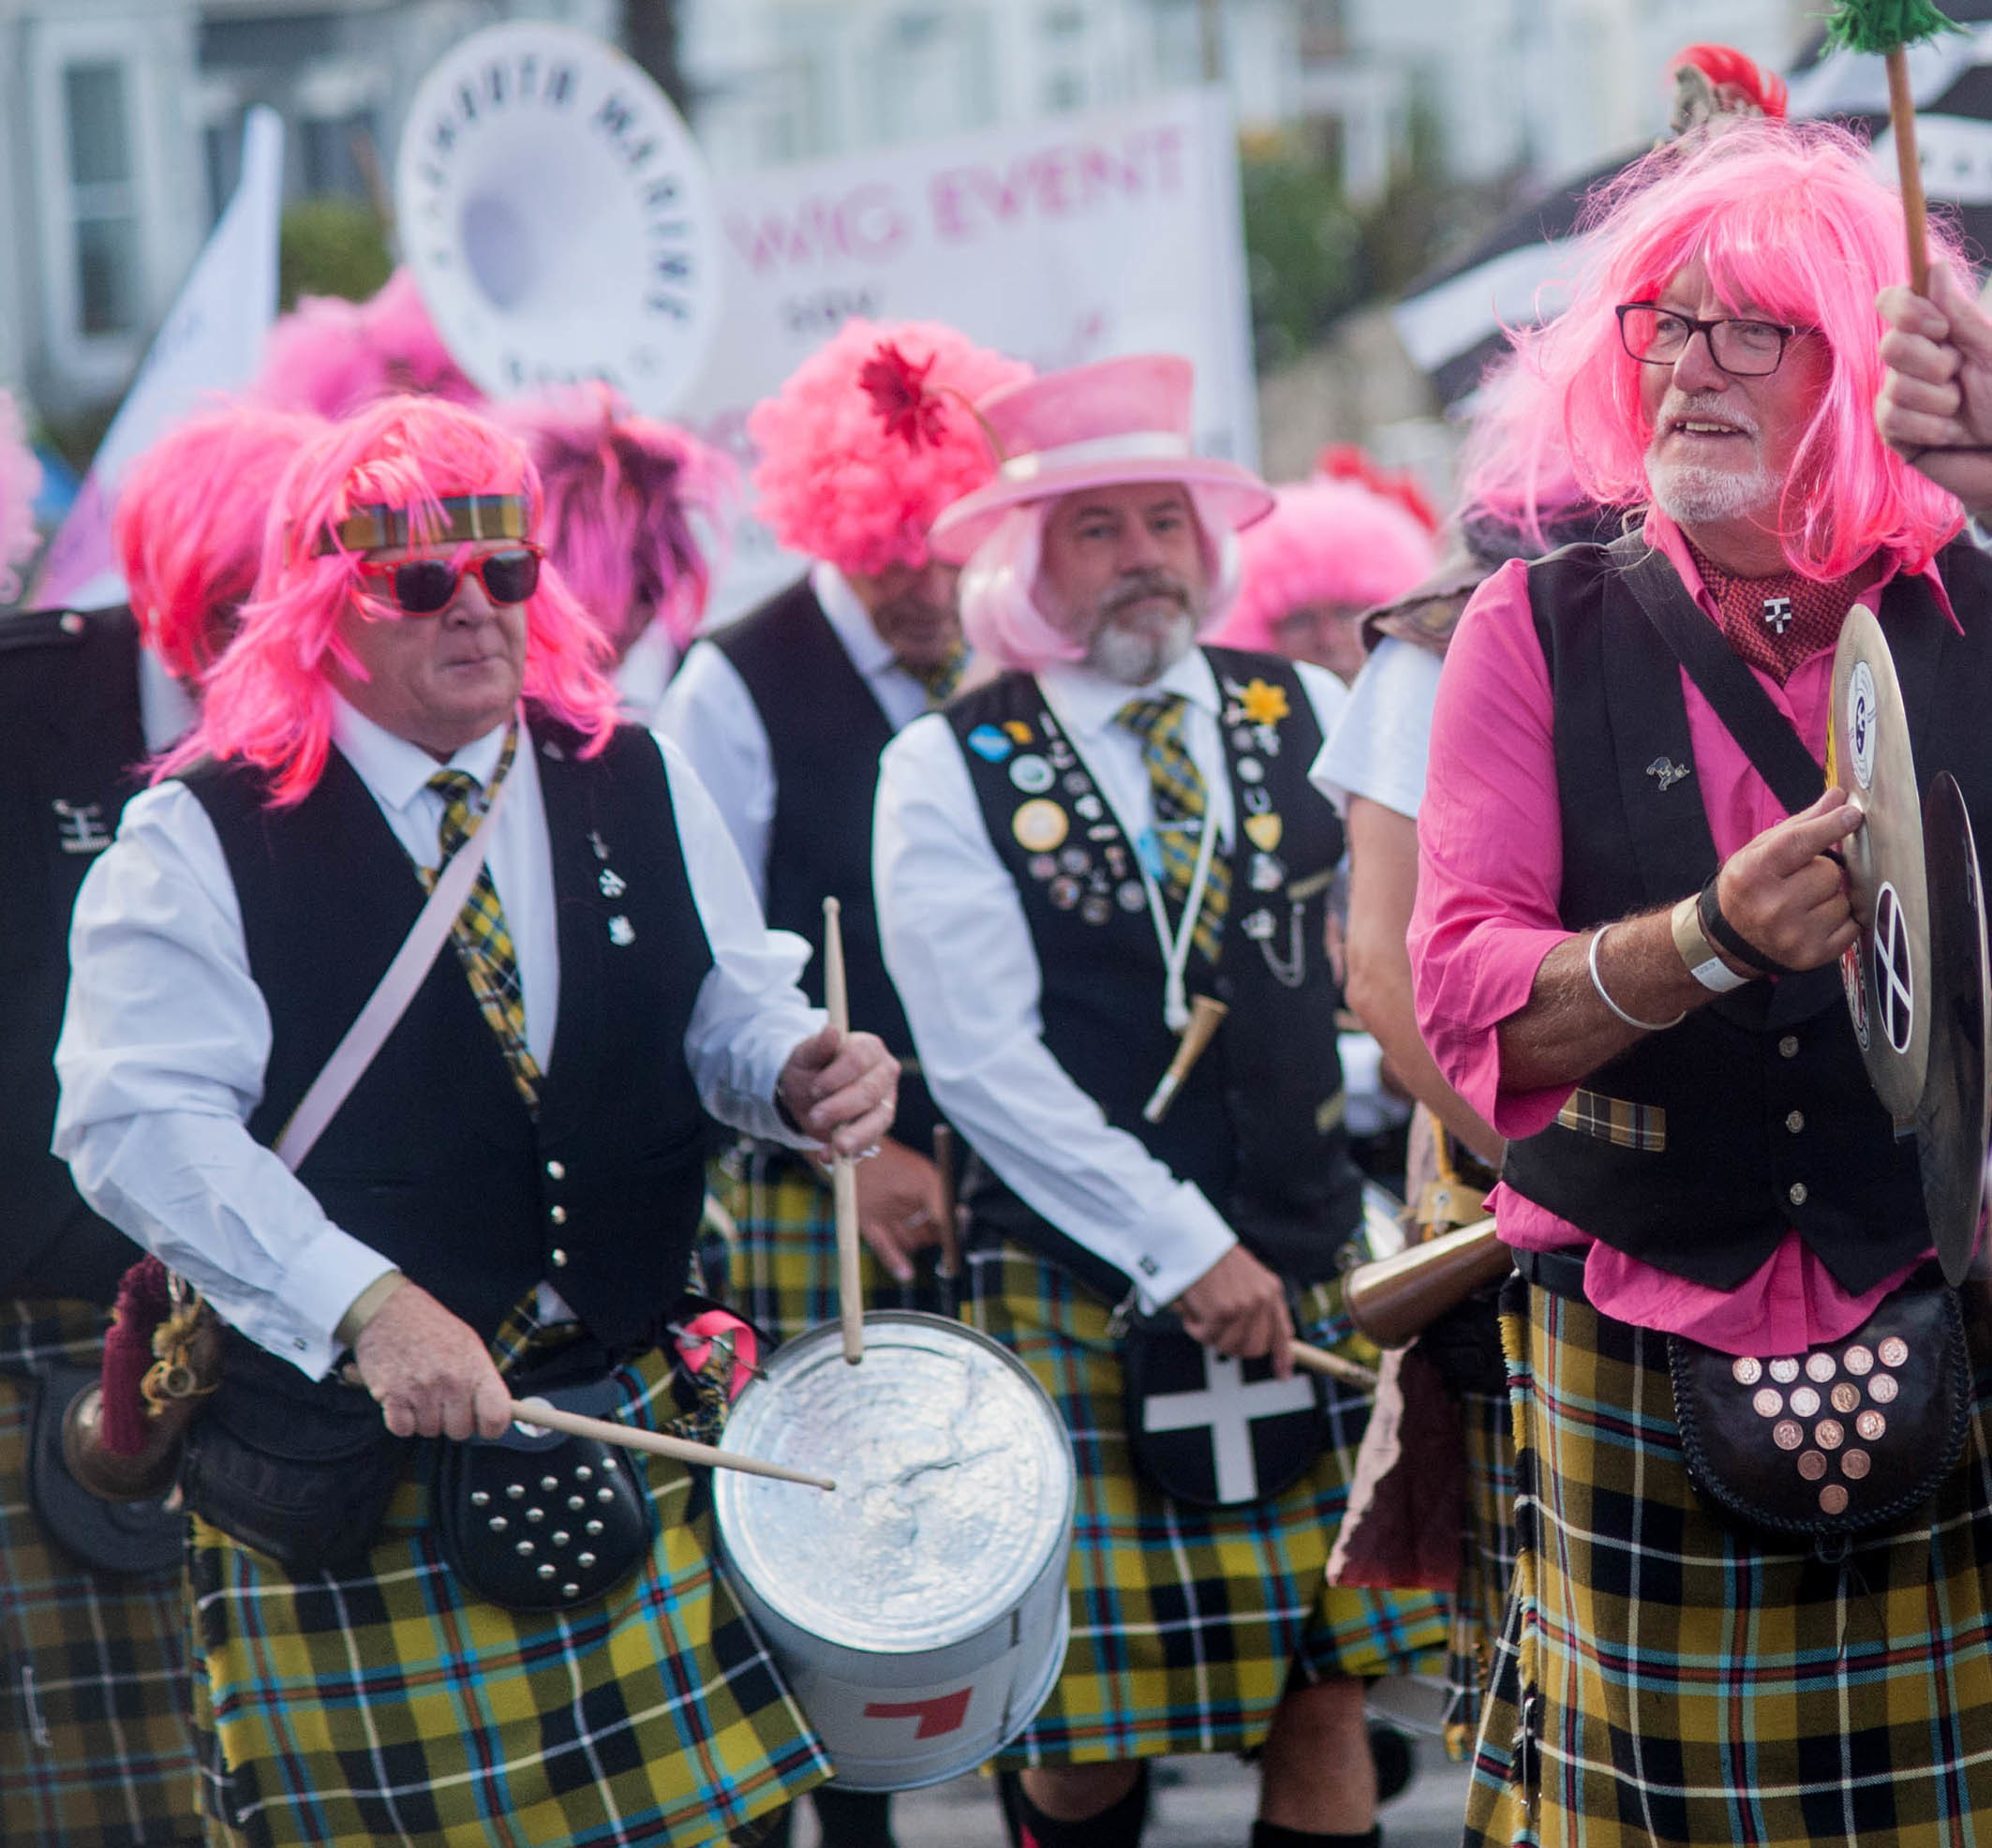 Falmouth Pink Wig Parade from the Greenbank Hotel to Church Street car park on Friday evening: The Falmouth Marine Band lead the parade. Picture by Colin Higgs